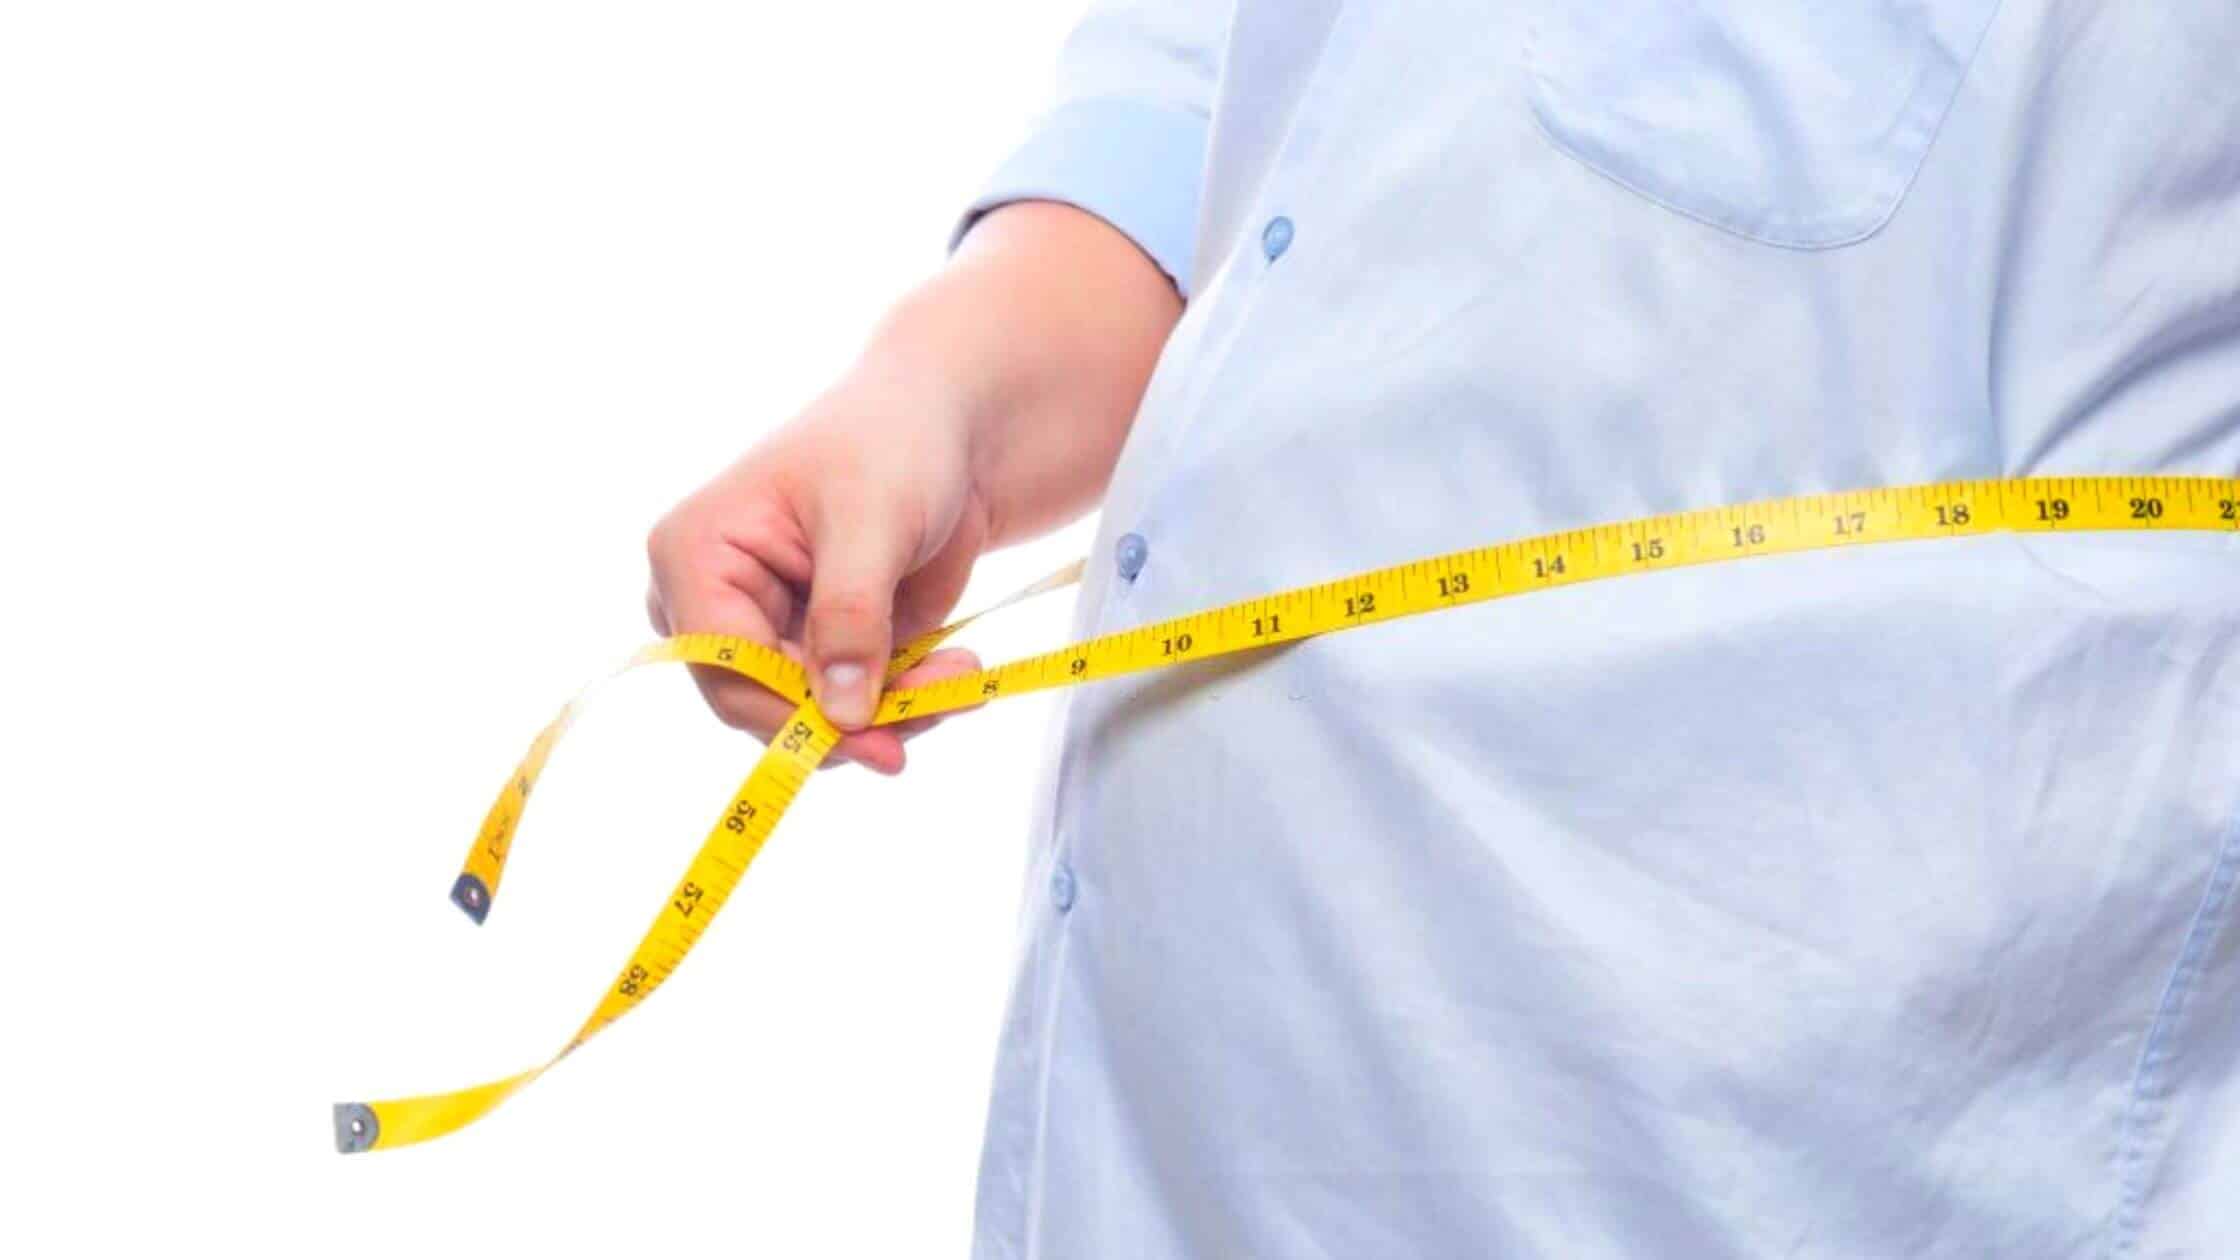 Doctors Recommend Reclassifying Obesity As An ADHD-Like Brain Condition